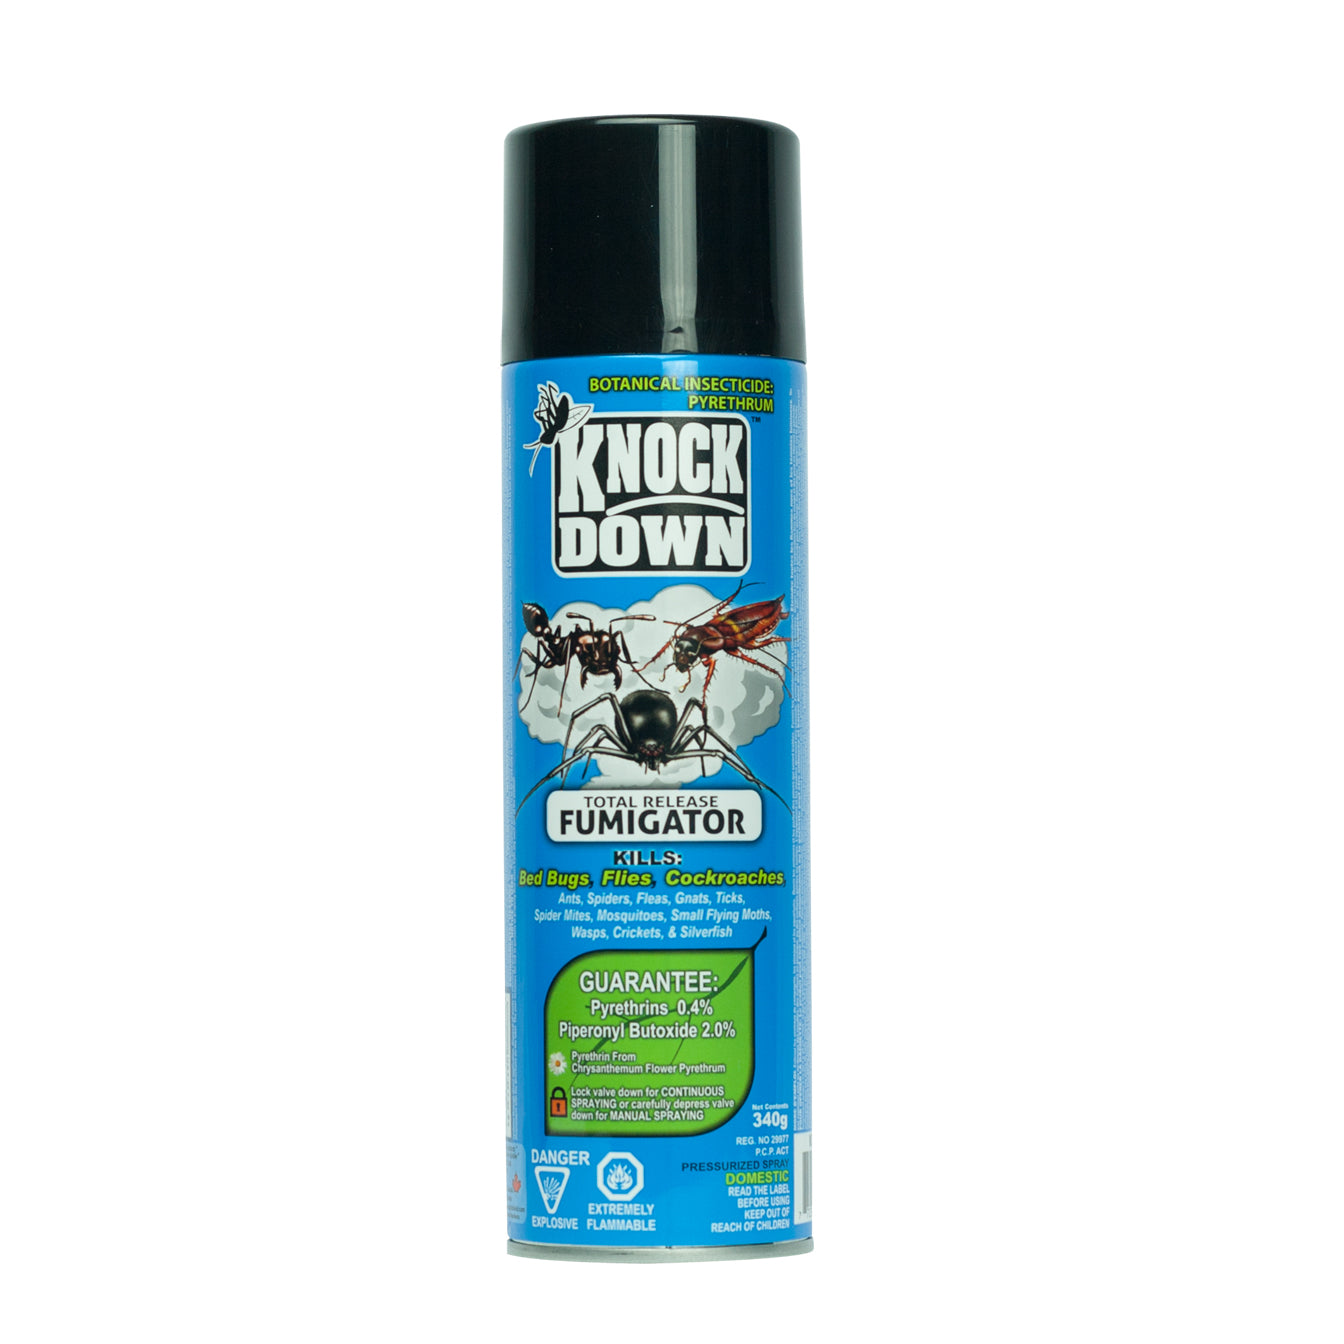 Knock Down Total Release Fumigator 340g